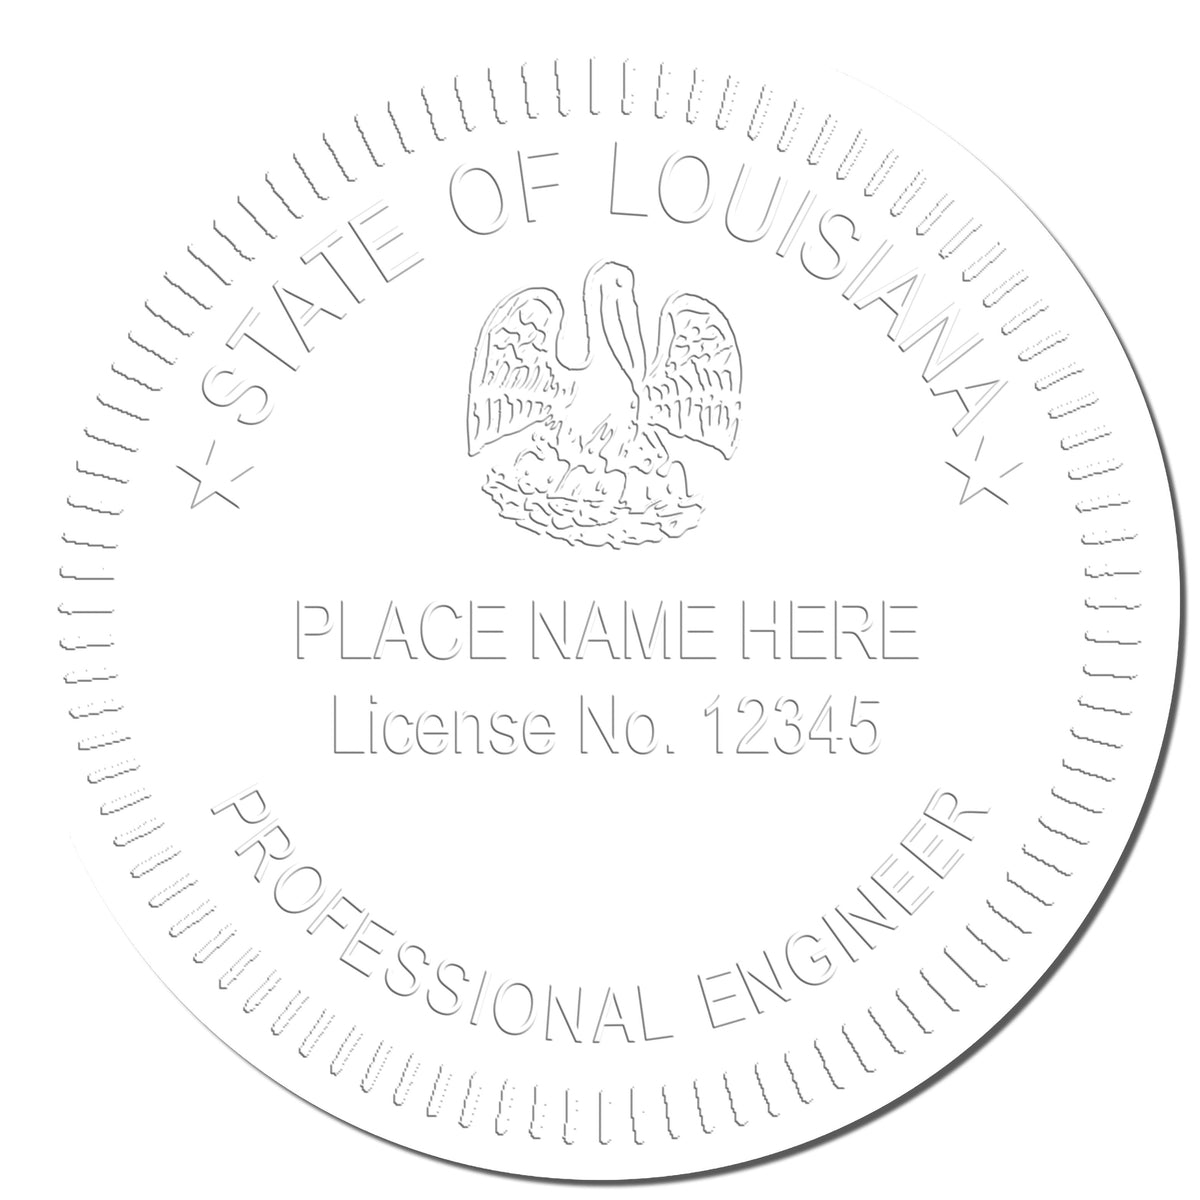 This paper is stamped with a sample imprint of the State of Louisiana Extended Long Reach Engineer Seal, signifying its quality and reliability.